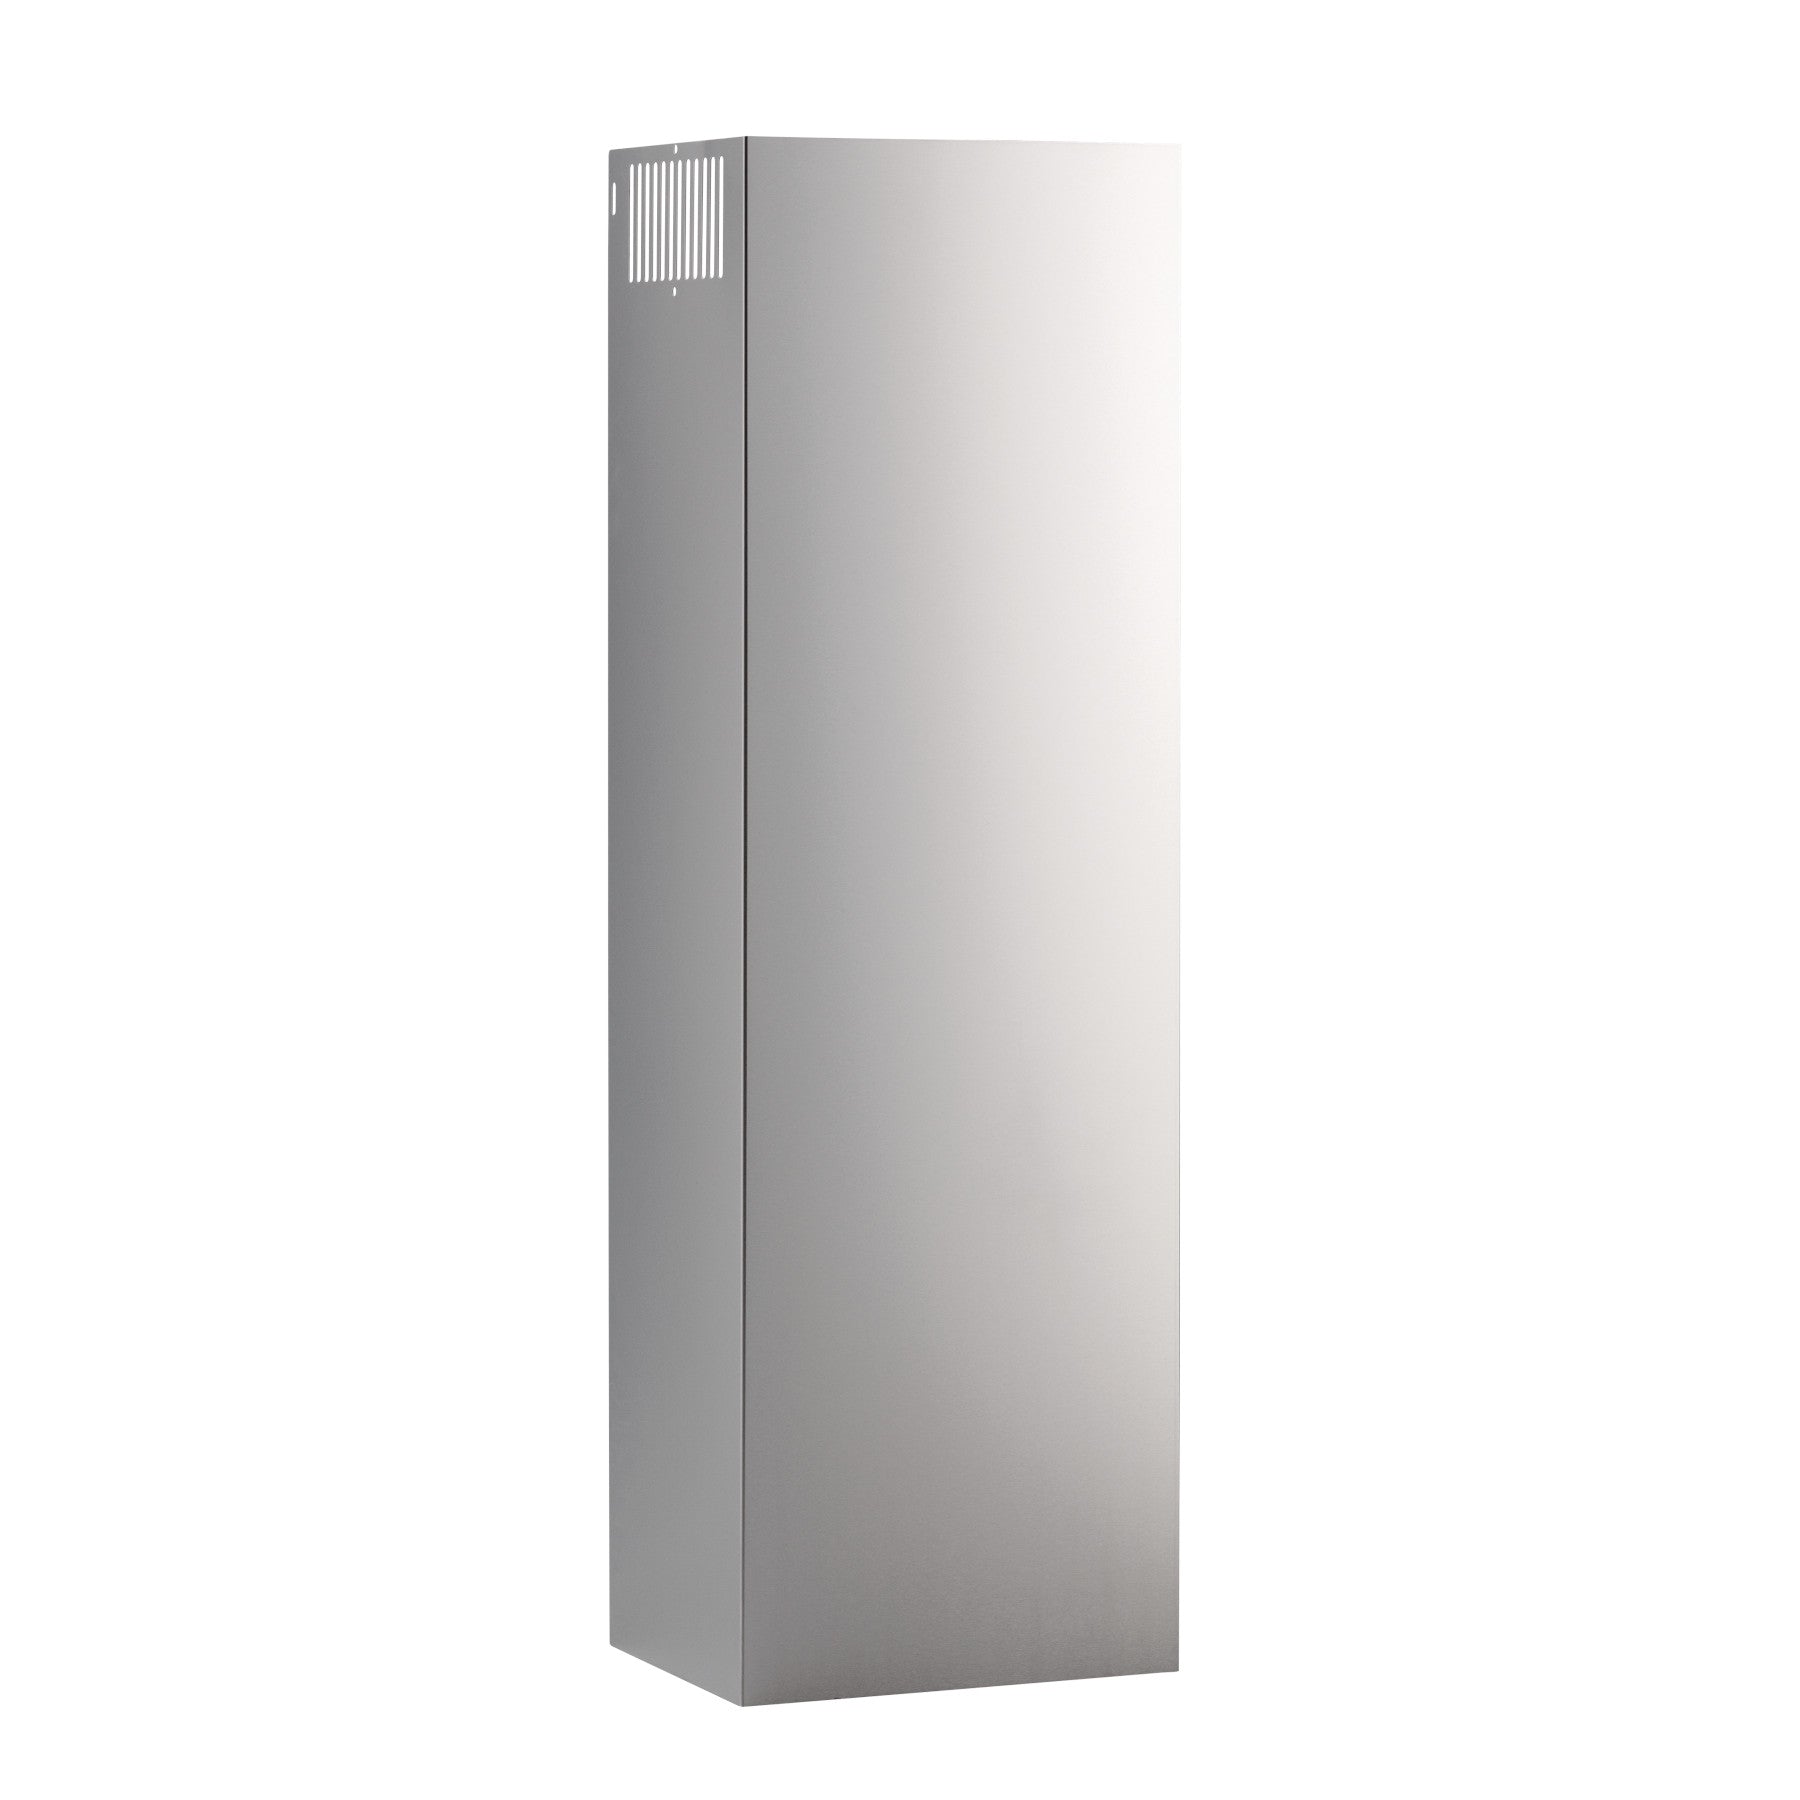 Broan - Optional Flue Extension Ventilation Accessory in Stainless - FXN58SS